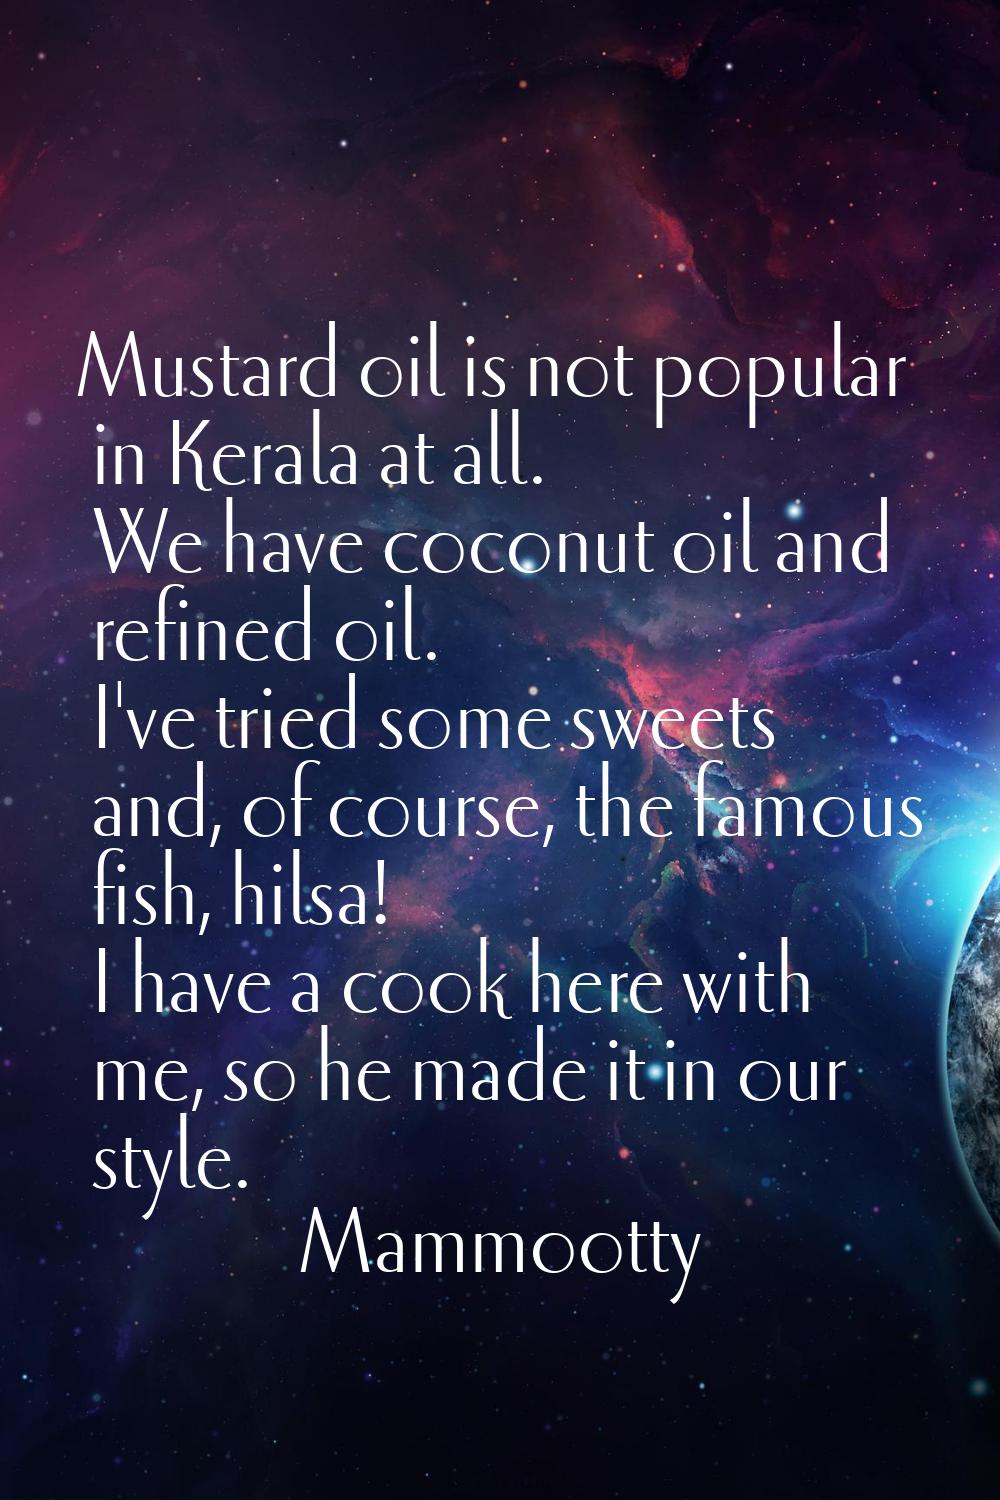 Mustard oil is not popular in Kerala at all. We have coconut oil and refined oil. I've tried some s